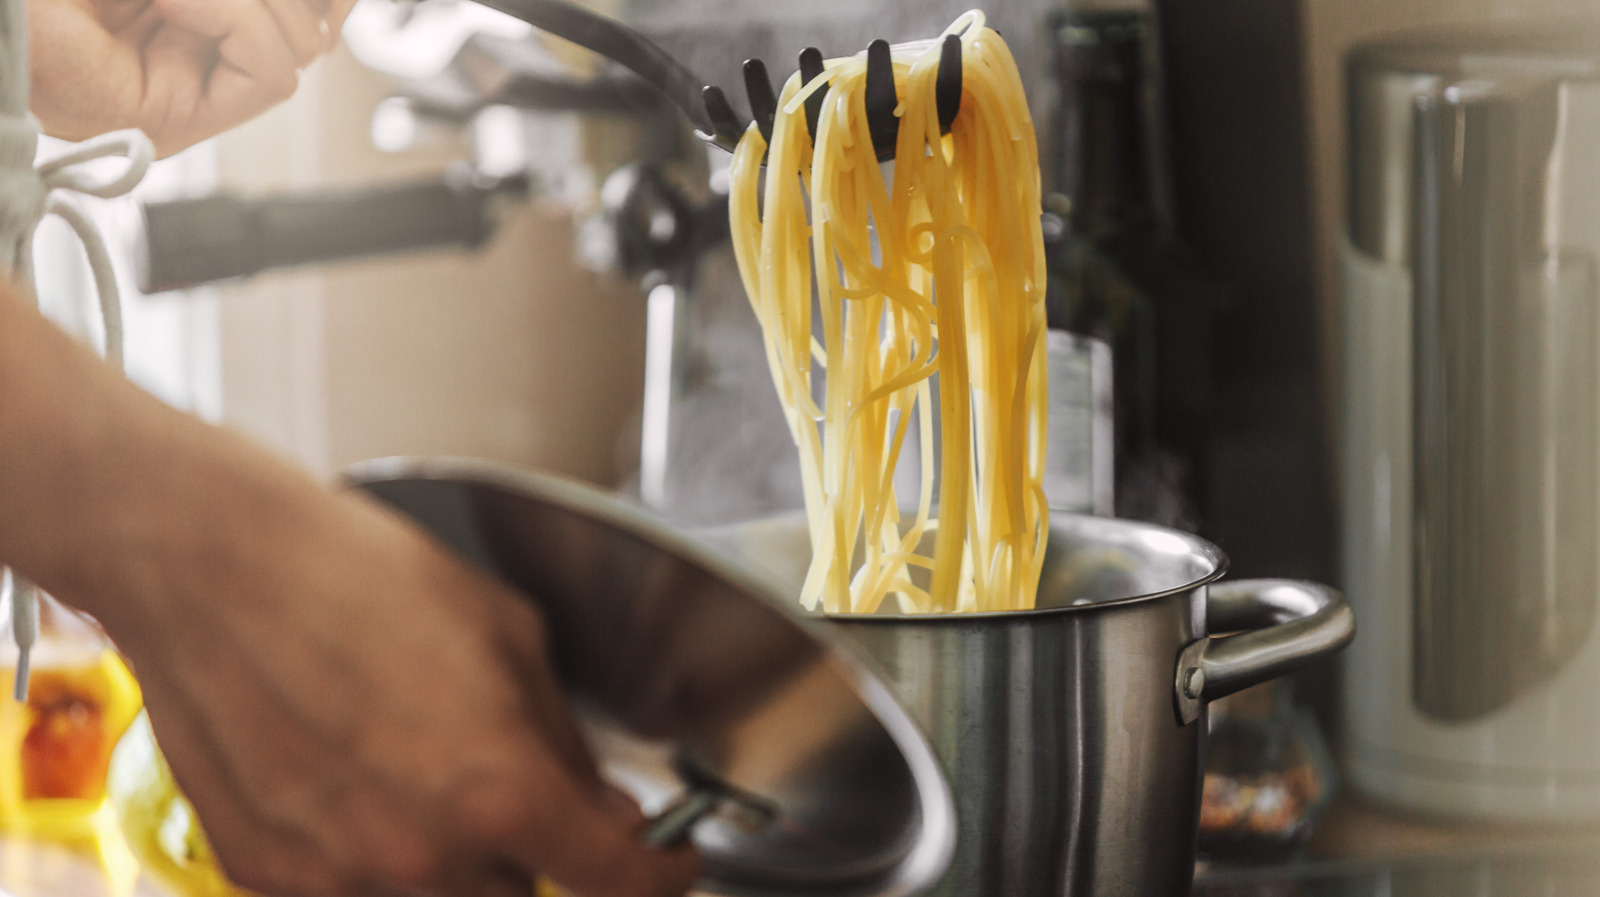 When You Should Be Adding Pasta To Boiling Water